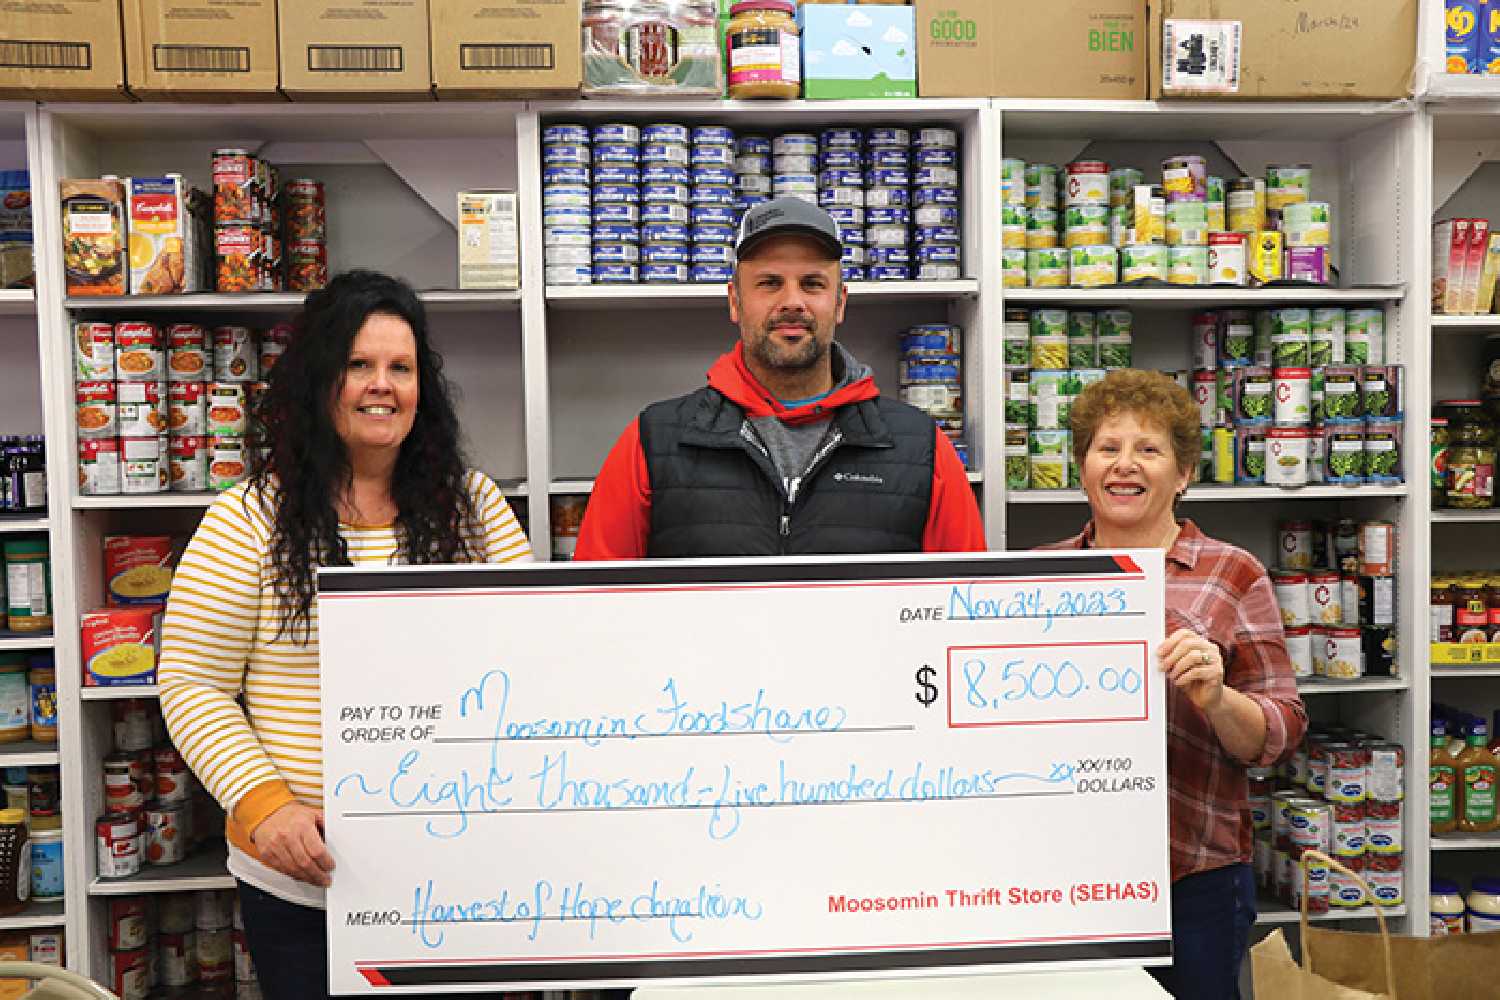 Marguerite Osborne, at left, and Lori Shepherd, at right, with the Moosomin Food Share, accepting a cheque for $8,500 from Kyle Penner of Harvest of Hope.